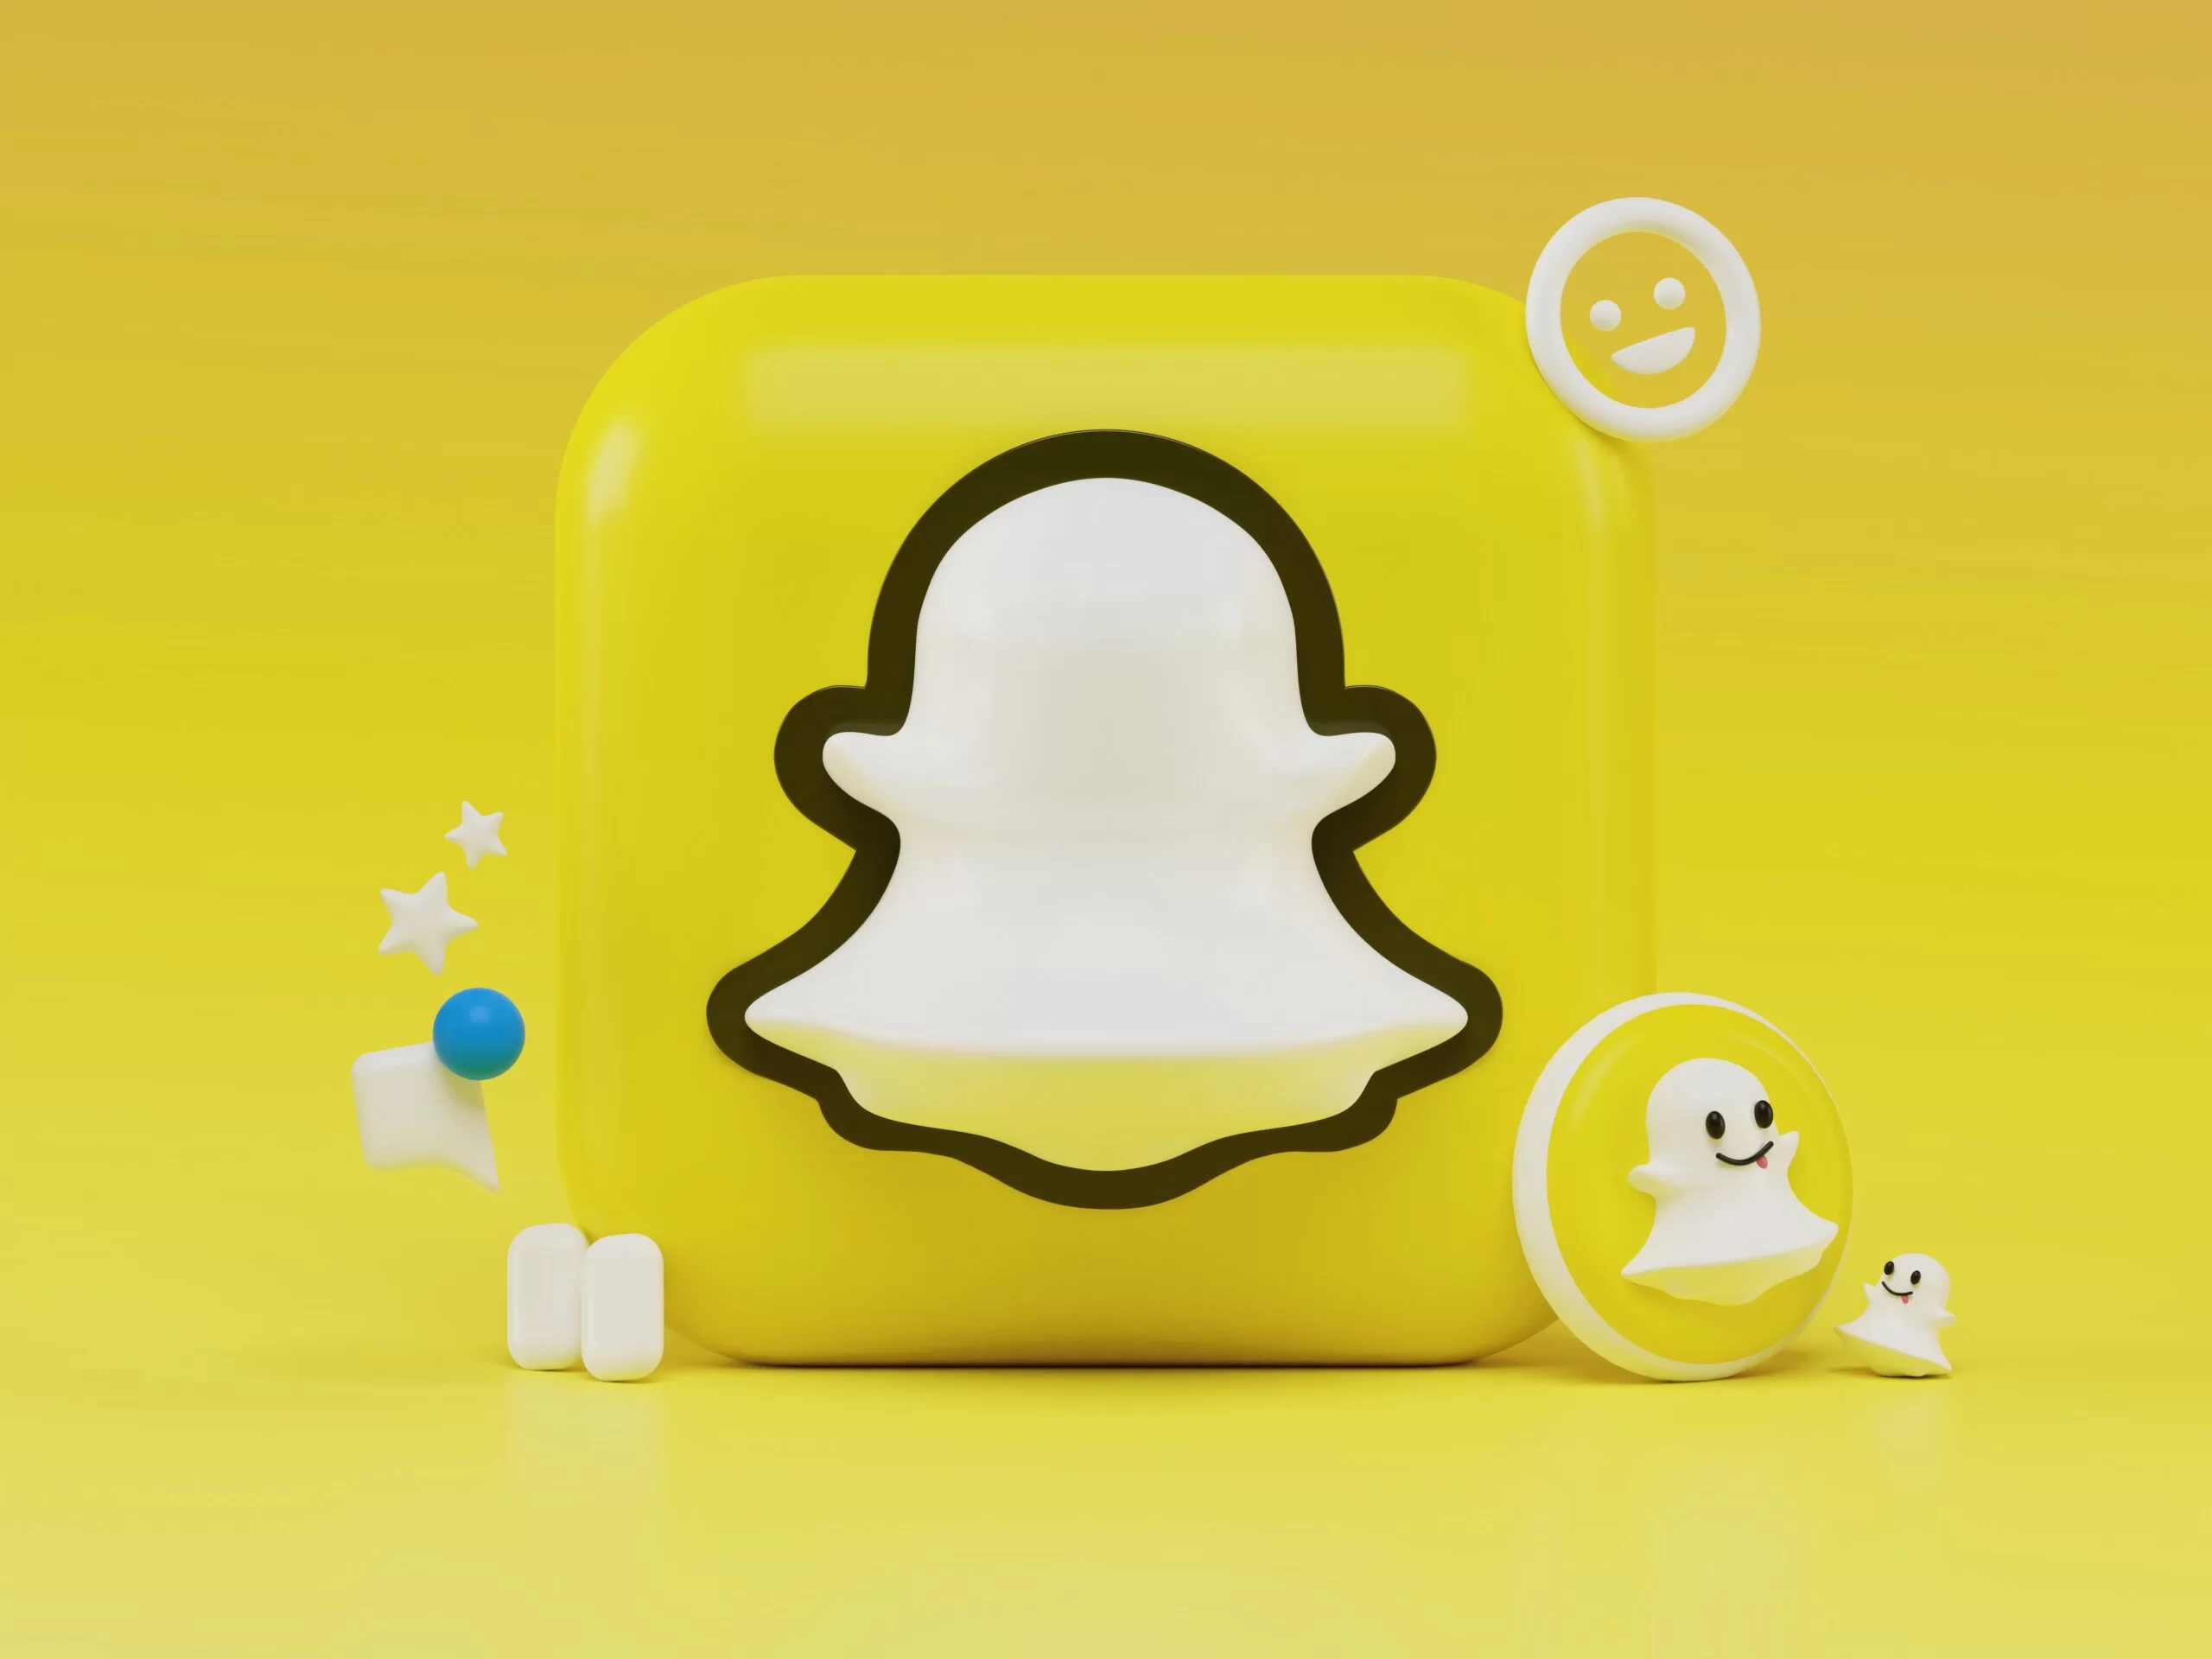 Latest Snapchat Features In 2023 You Should Know About